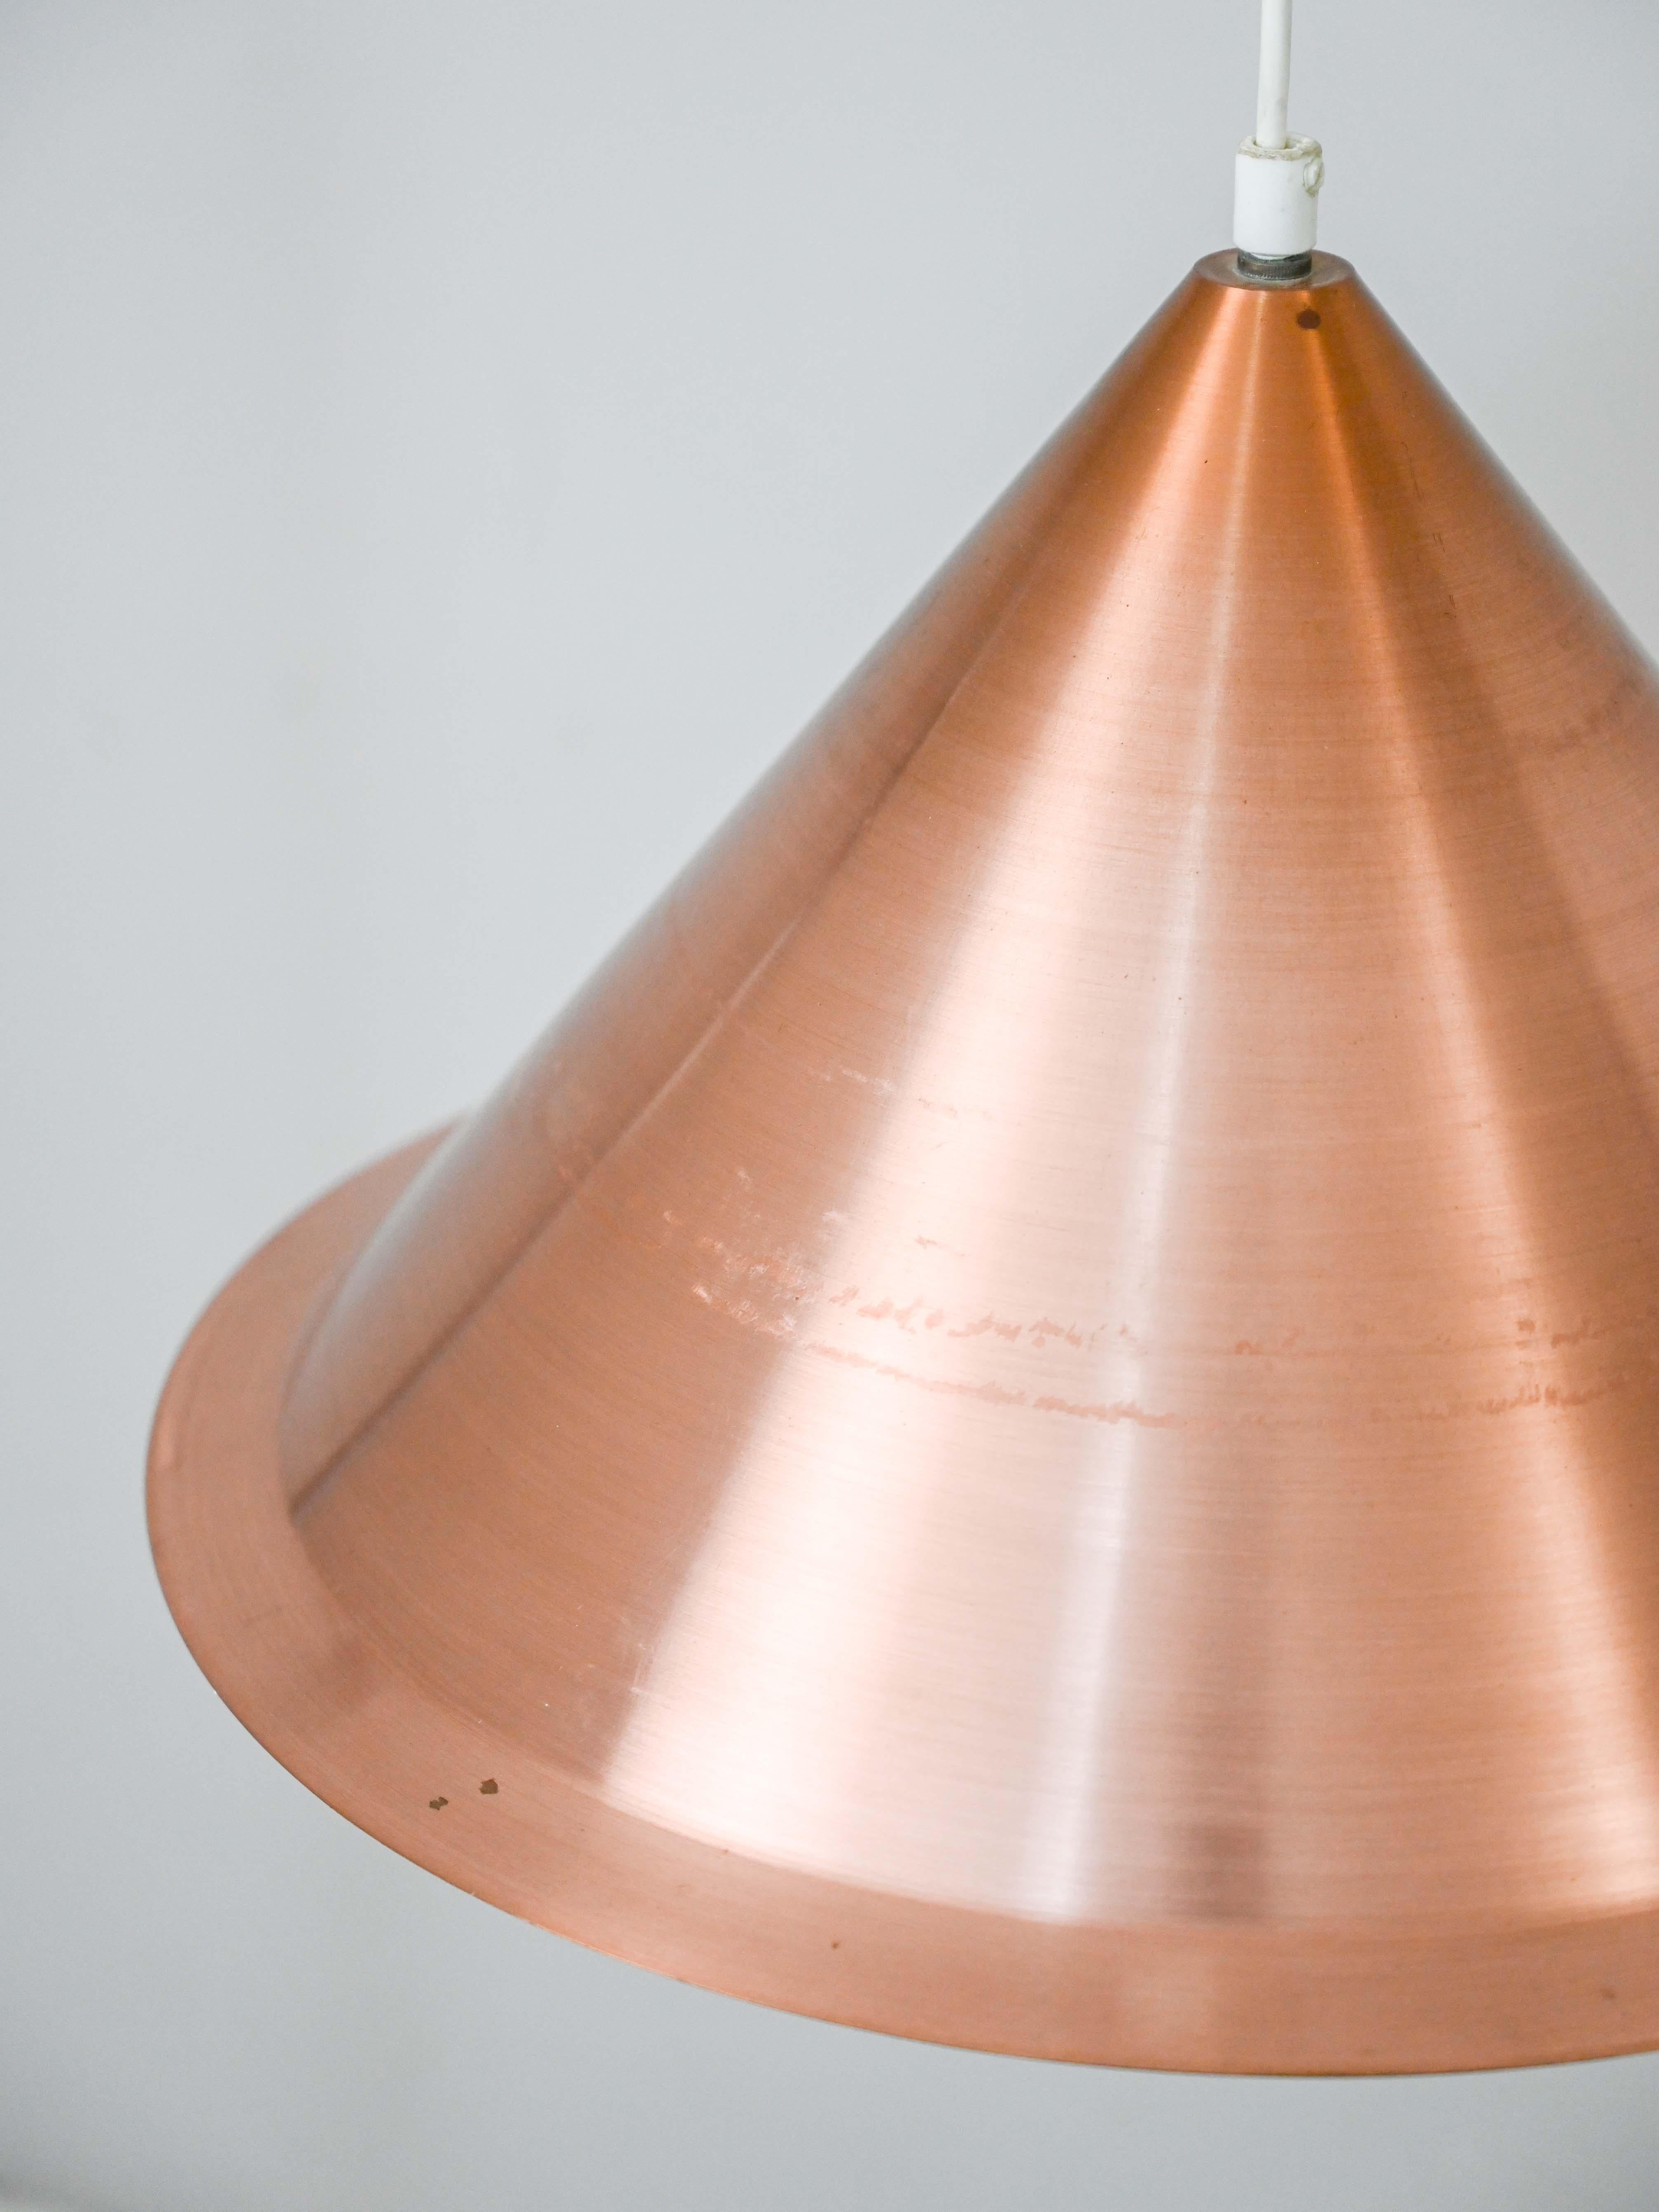 1960s vintage chrome lamp.

This hanging lamp features a conical copper-colored shade with a matte but reflective finish.

The simple lines and small size make it suitable for hanging above the dining table.

Good vintage condition. shows some signs